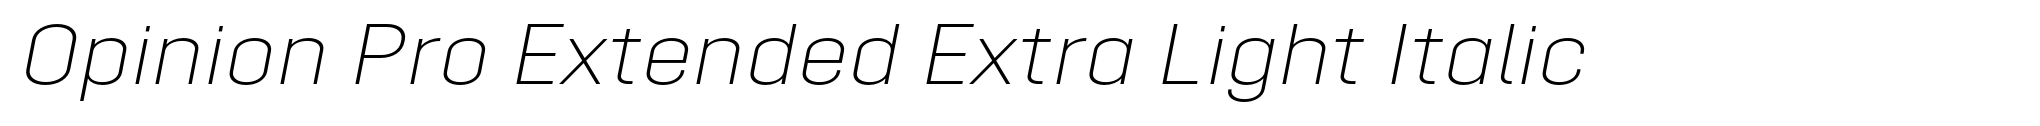 Opinion Pro Extended Extra Light Italic image